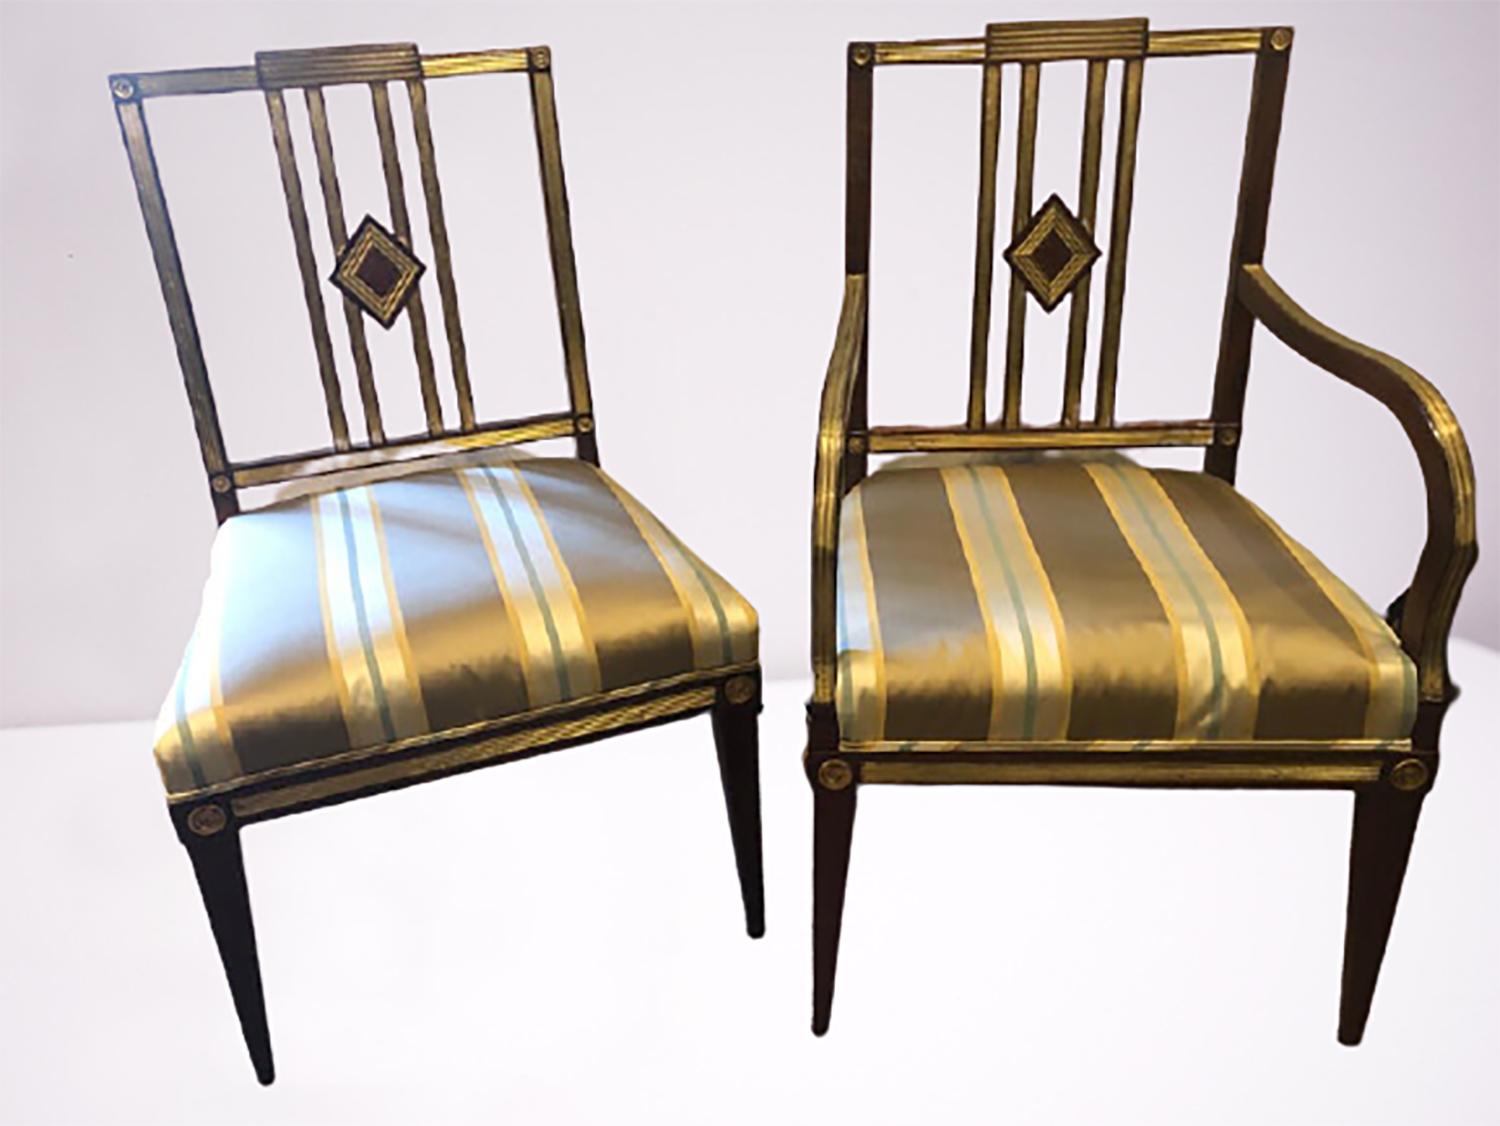 One of a kind set of eleven Russian neoclassical dining chairs. One arm and ten sides comprise this fantastic set of dining chairs.

This set is one of a part of the recently acquired pieces from the private collection of a NYC collector. A forty